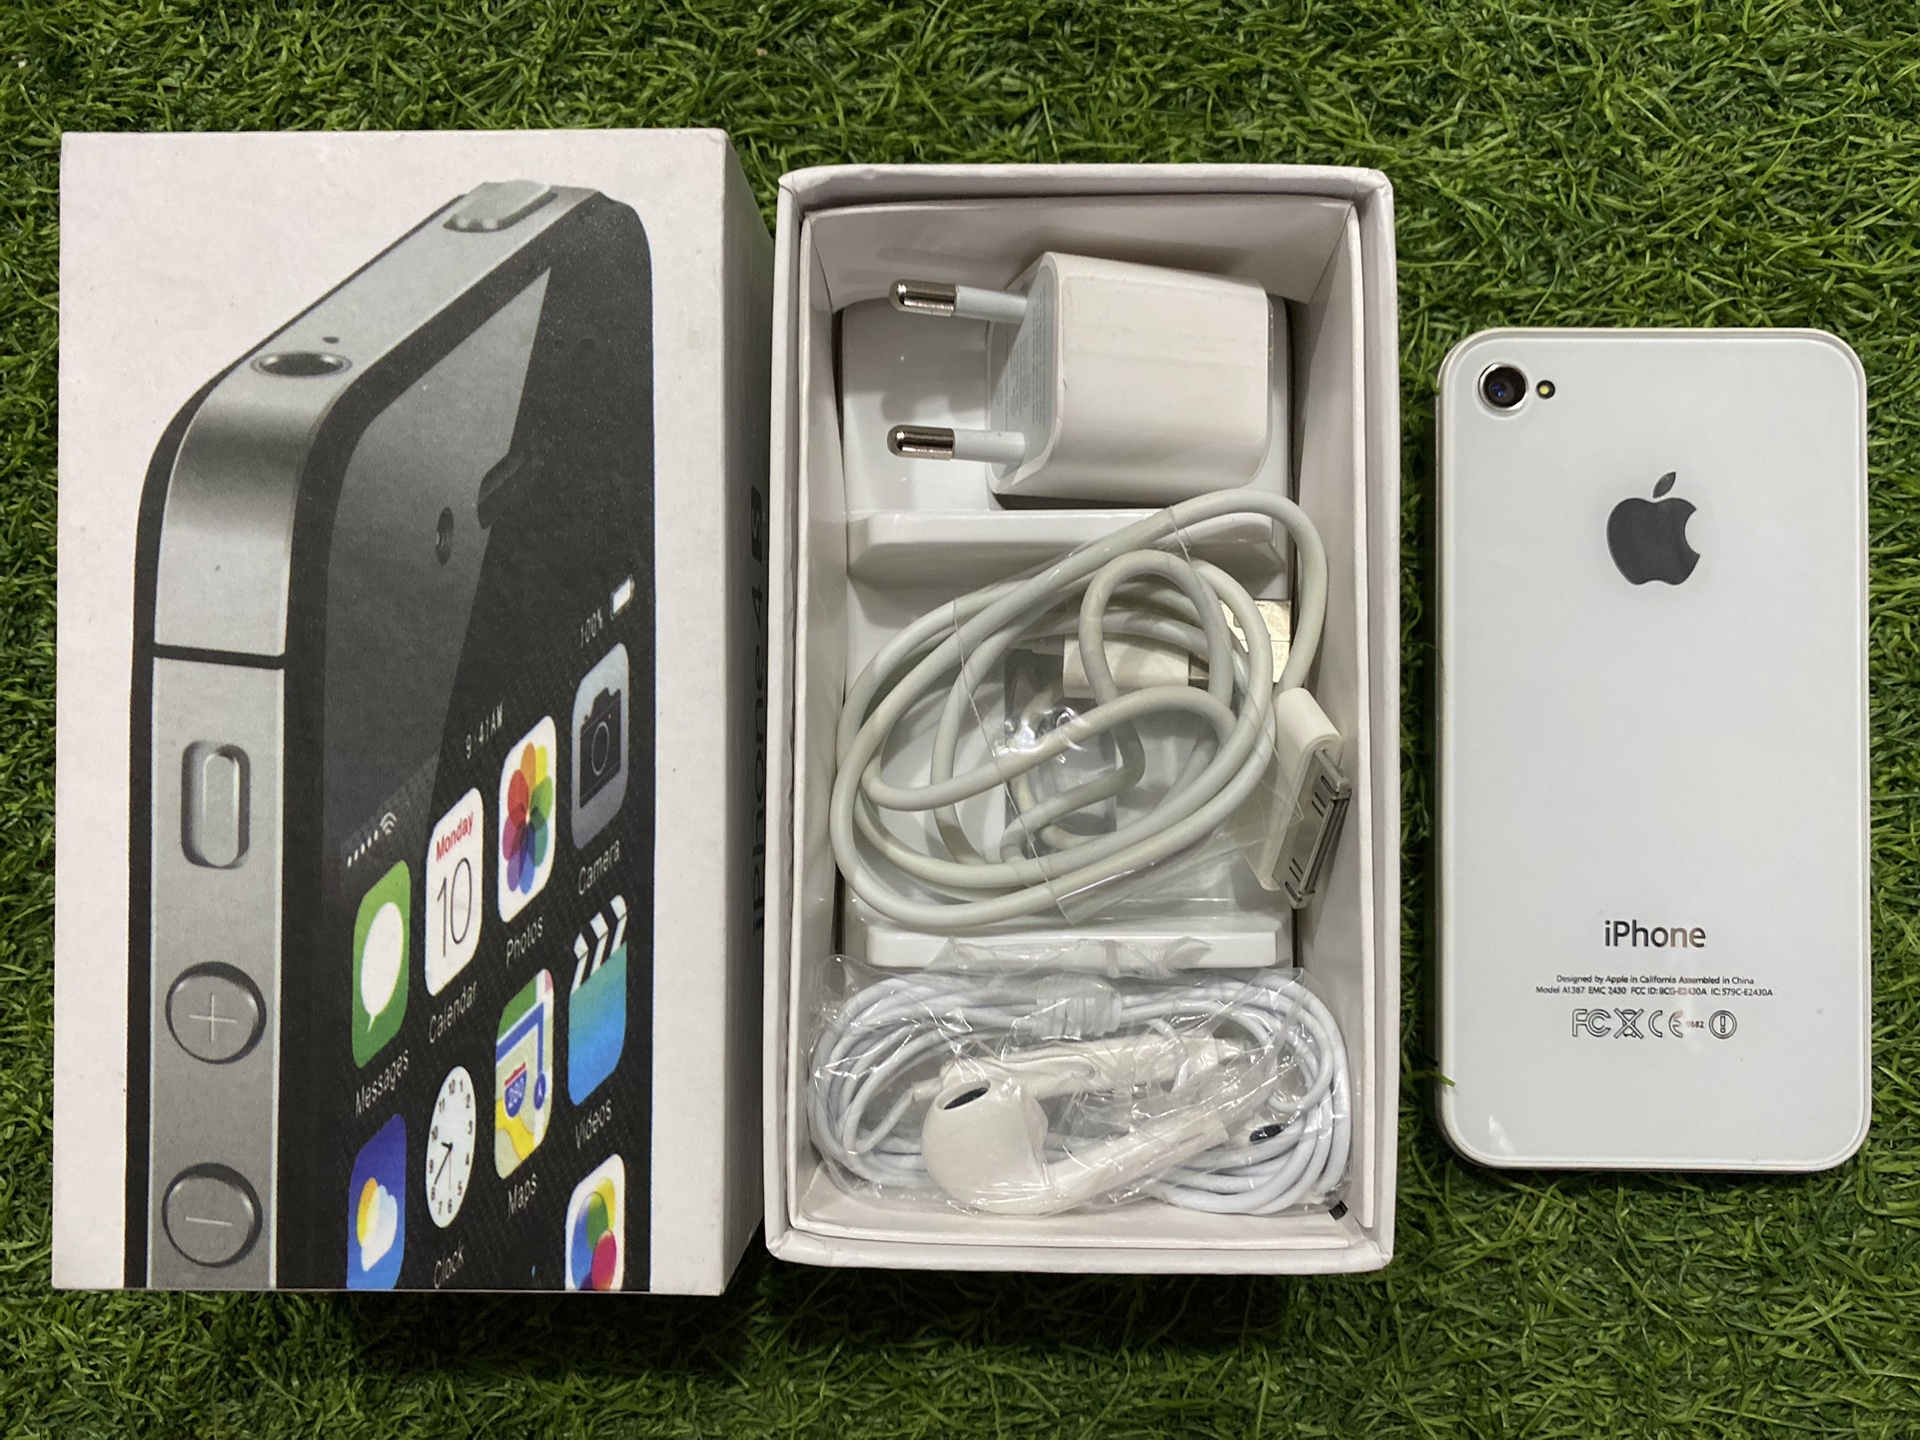 Apple iPhone 4s 16GB With Box and Accessories 3 Month Warranty - Black